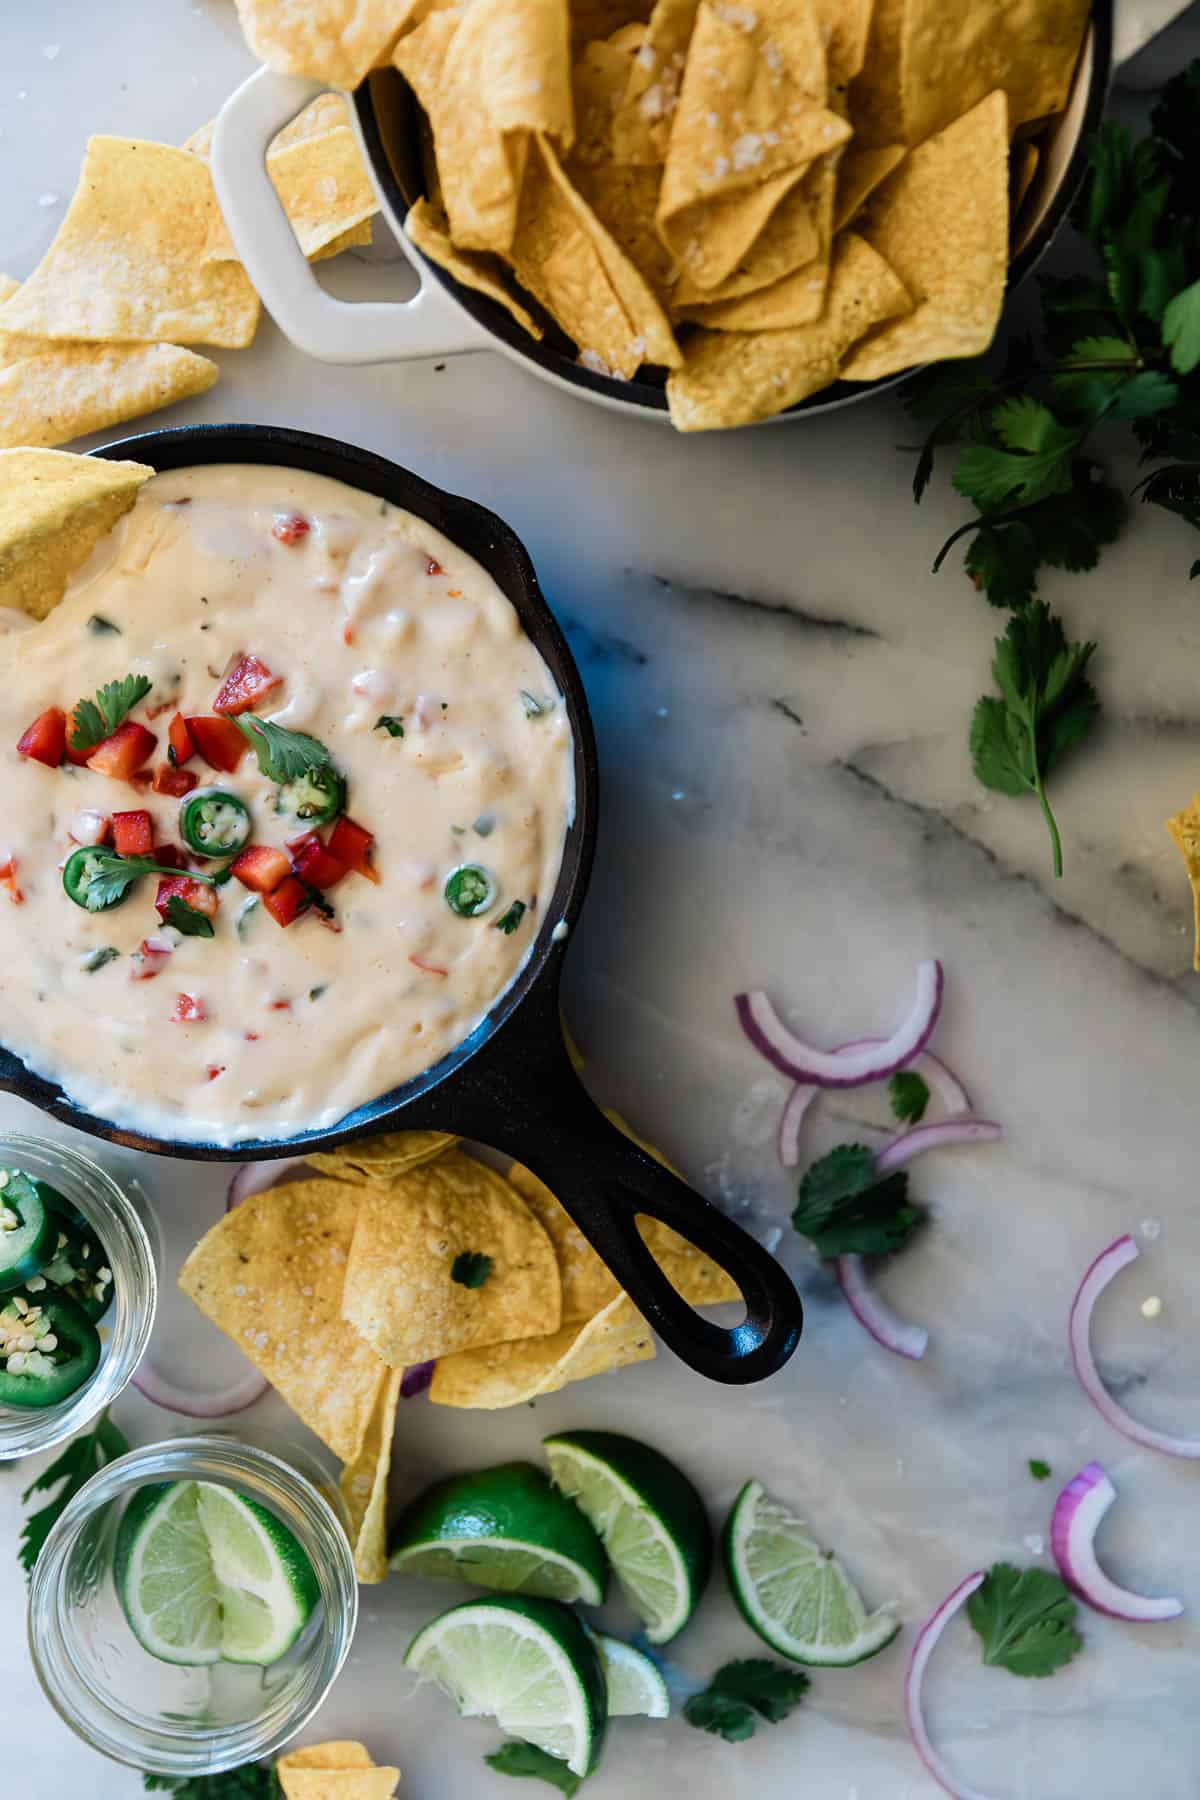 Queso blanco Mexican cheese dip in a small cast iron skillet. It is set on a marble counter and surround by chips.